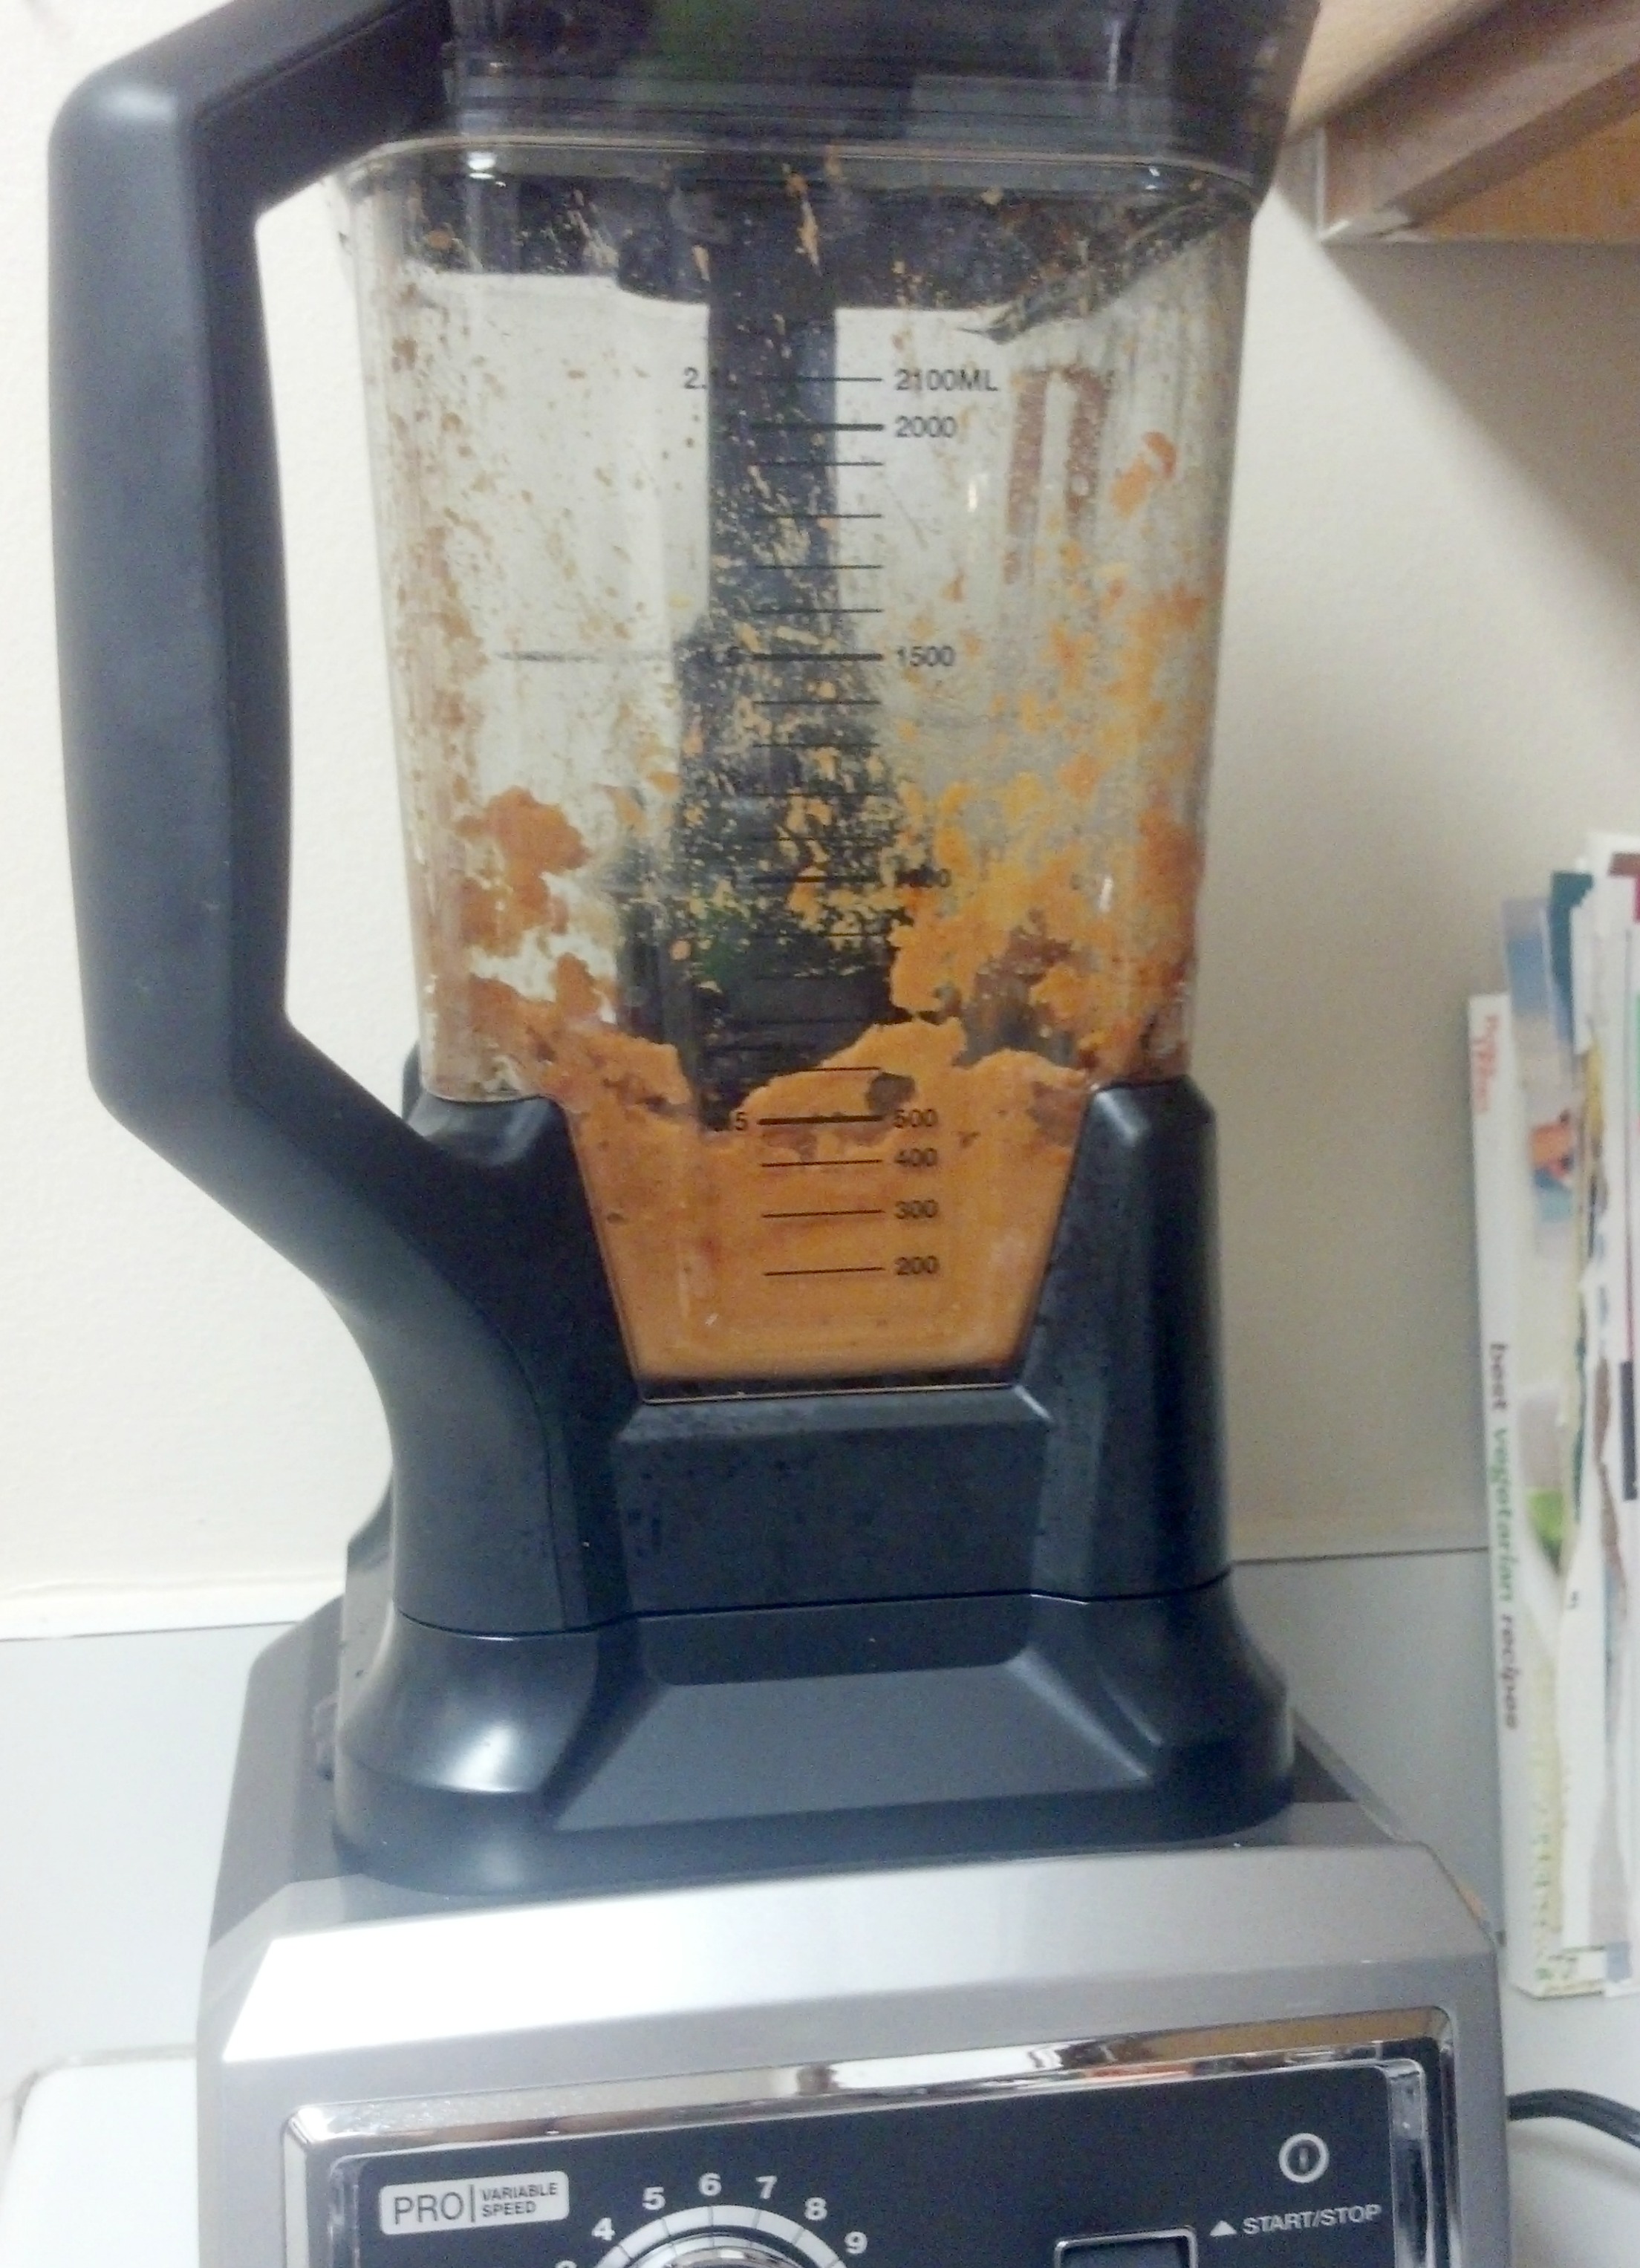 The Ninja smoothie blender is ready to emulsify